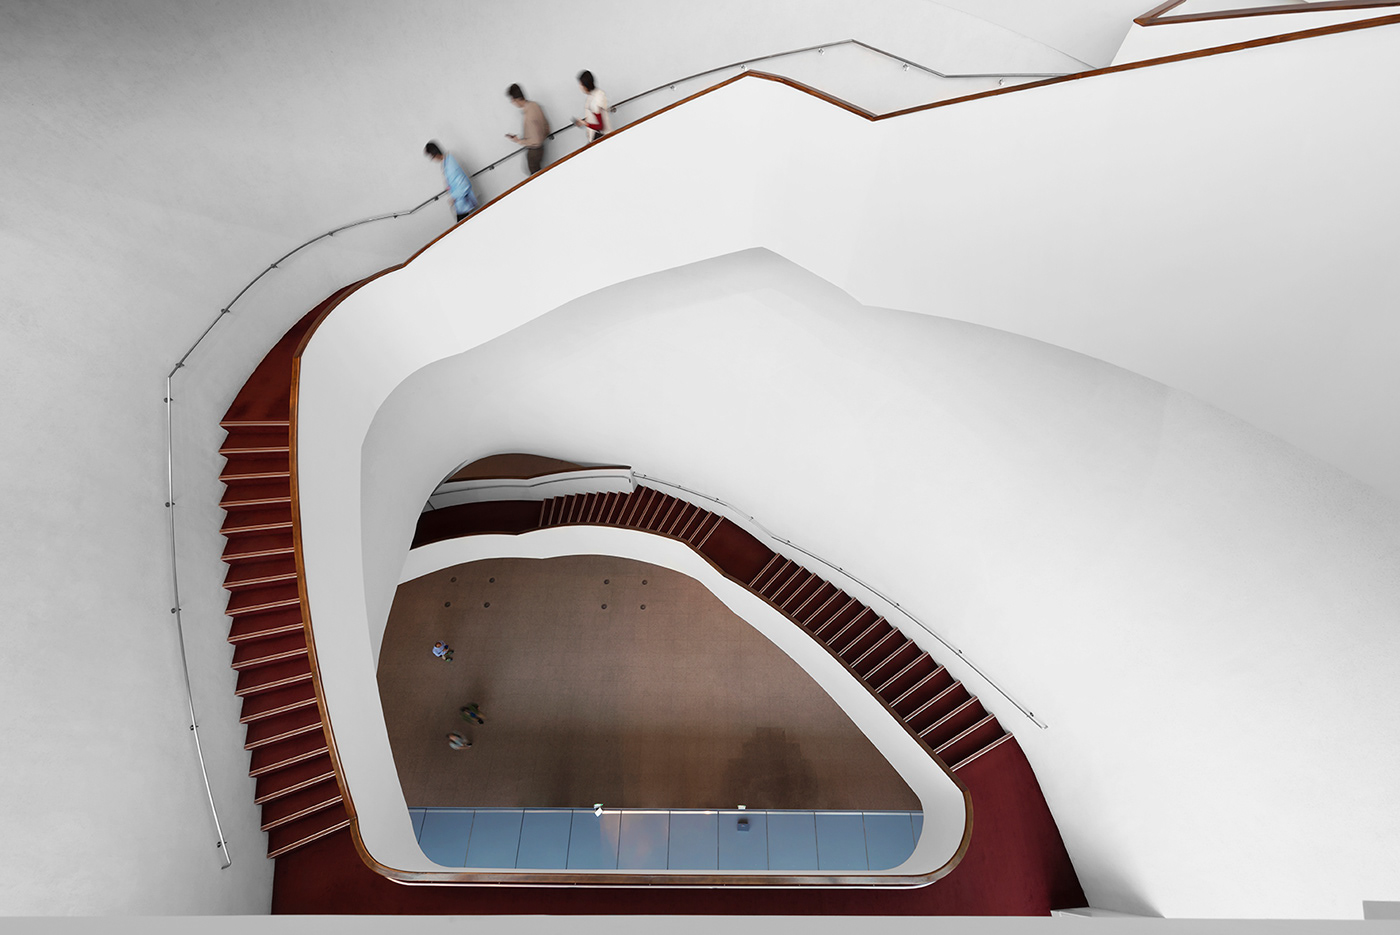 taiwan taichung asia theater  architecture Aerial arquitectura building museum Performing Arts 